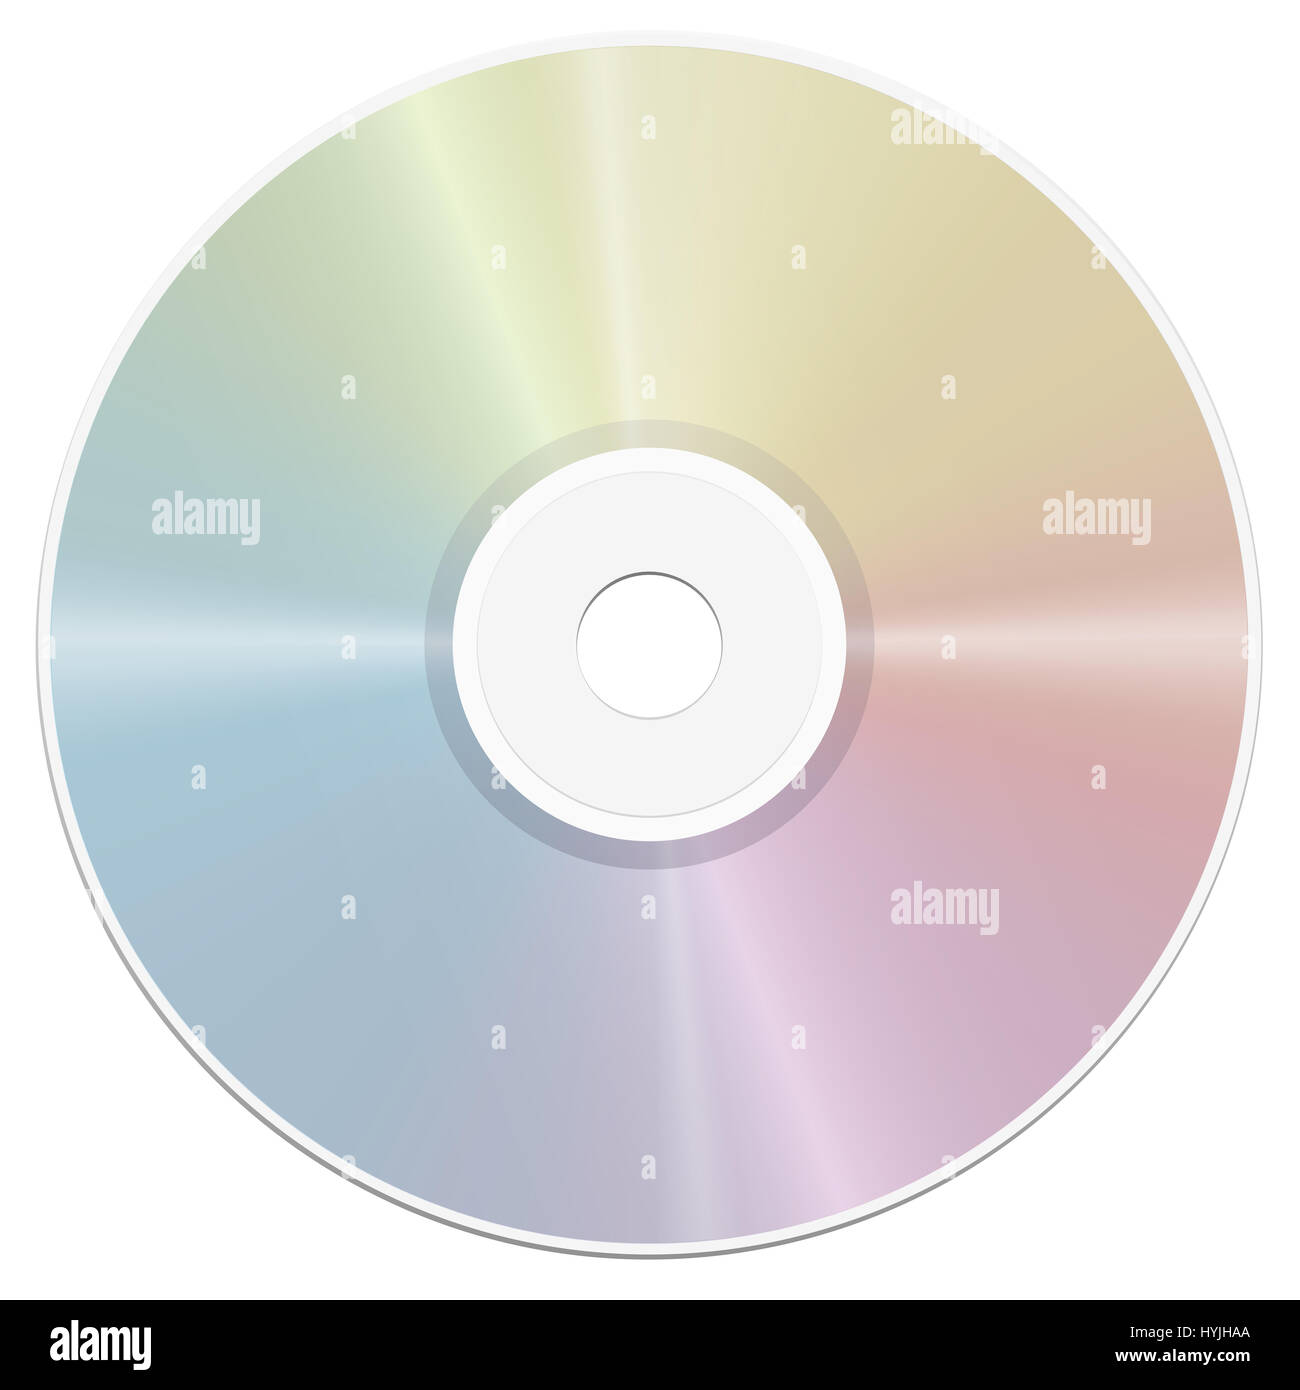 Compact disc - rainbow gradient surface reflection- realistic isolated illustration on white background. Stock Photo